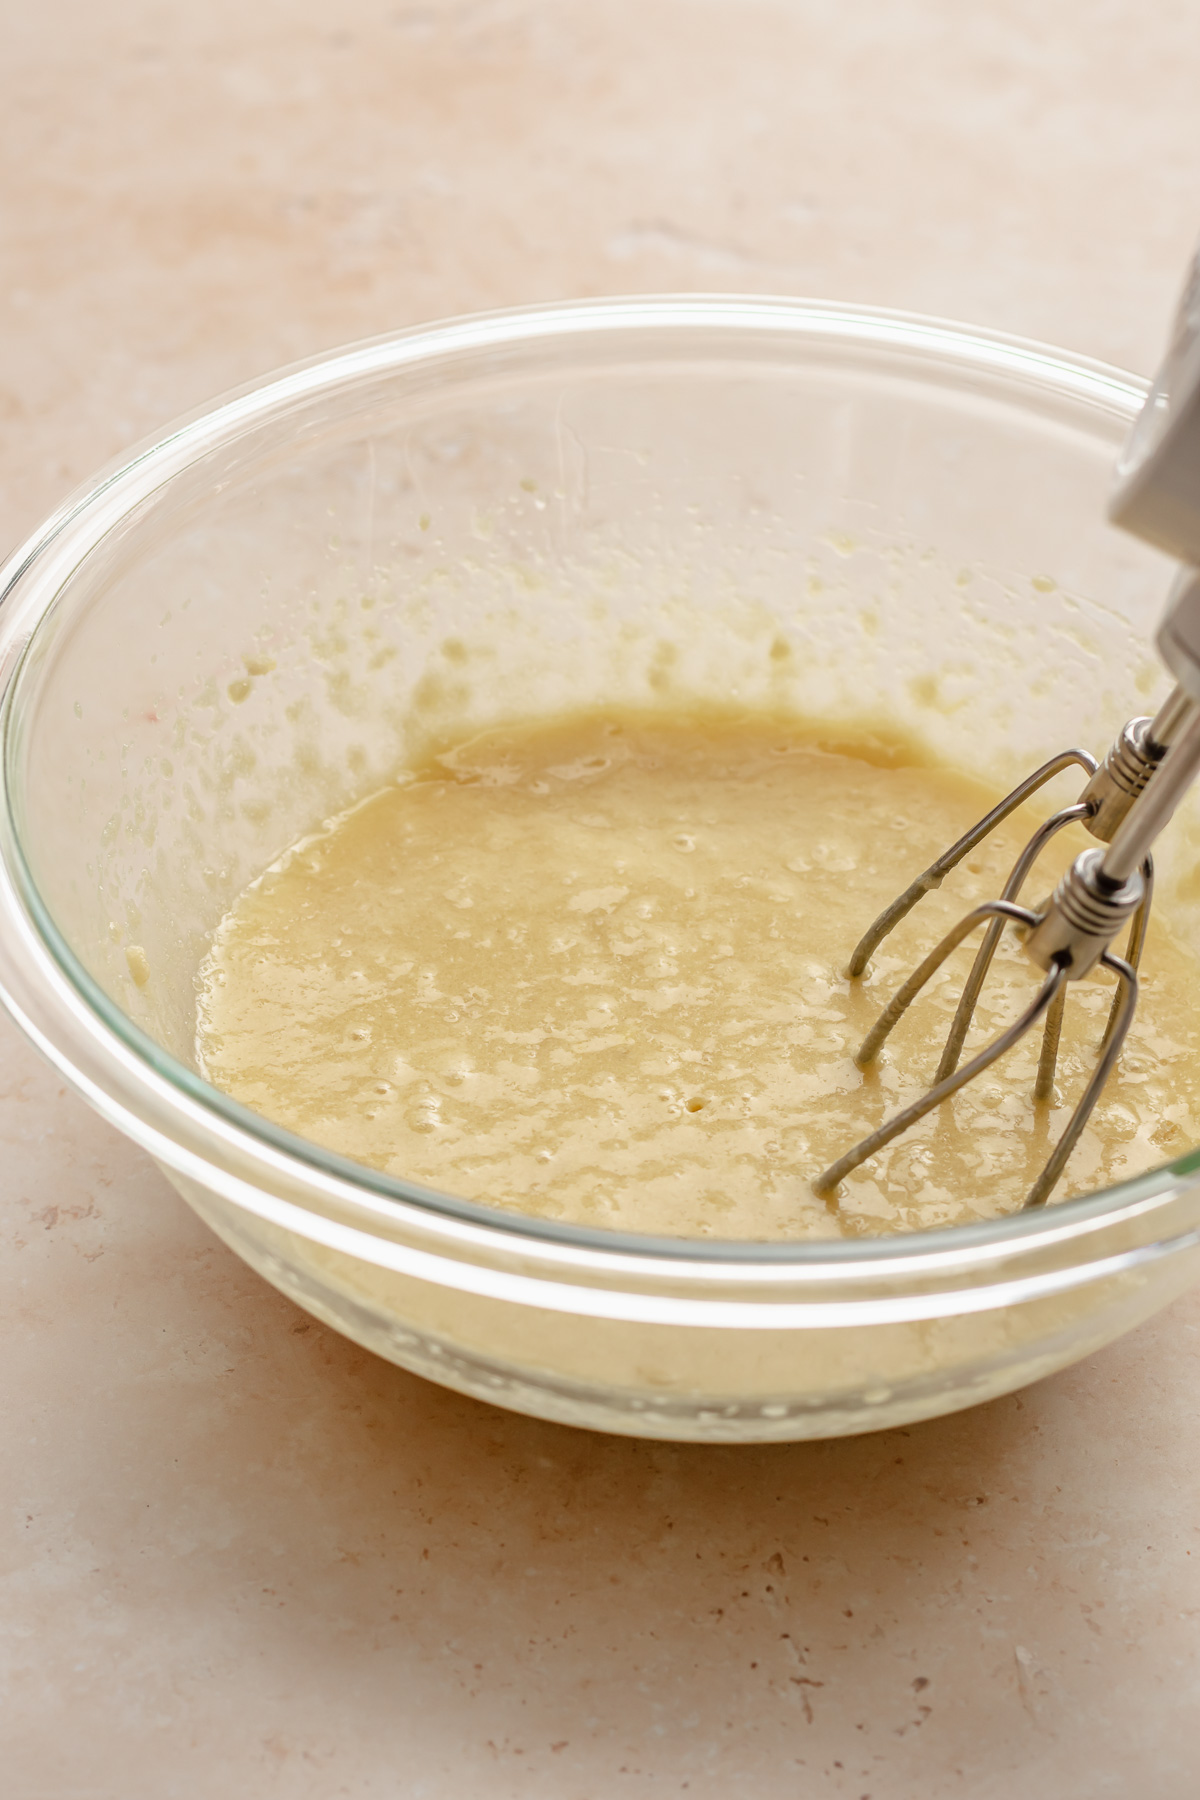 Beaters mixing cake batter in a bowl.